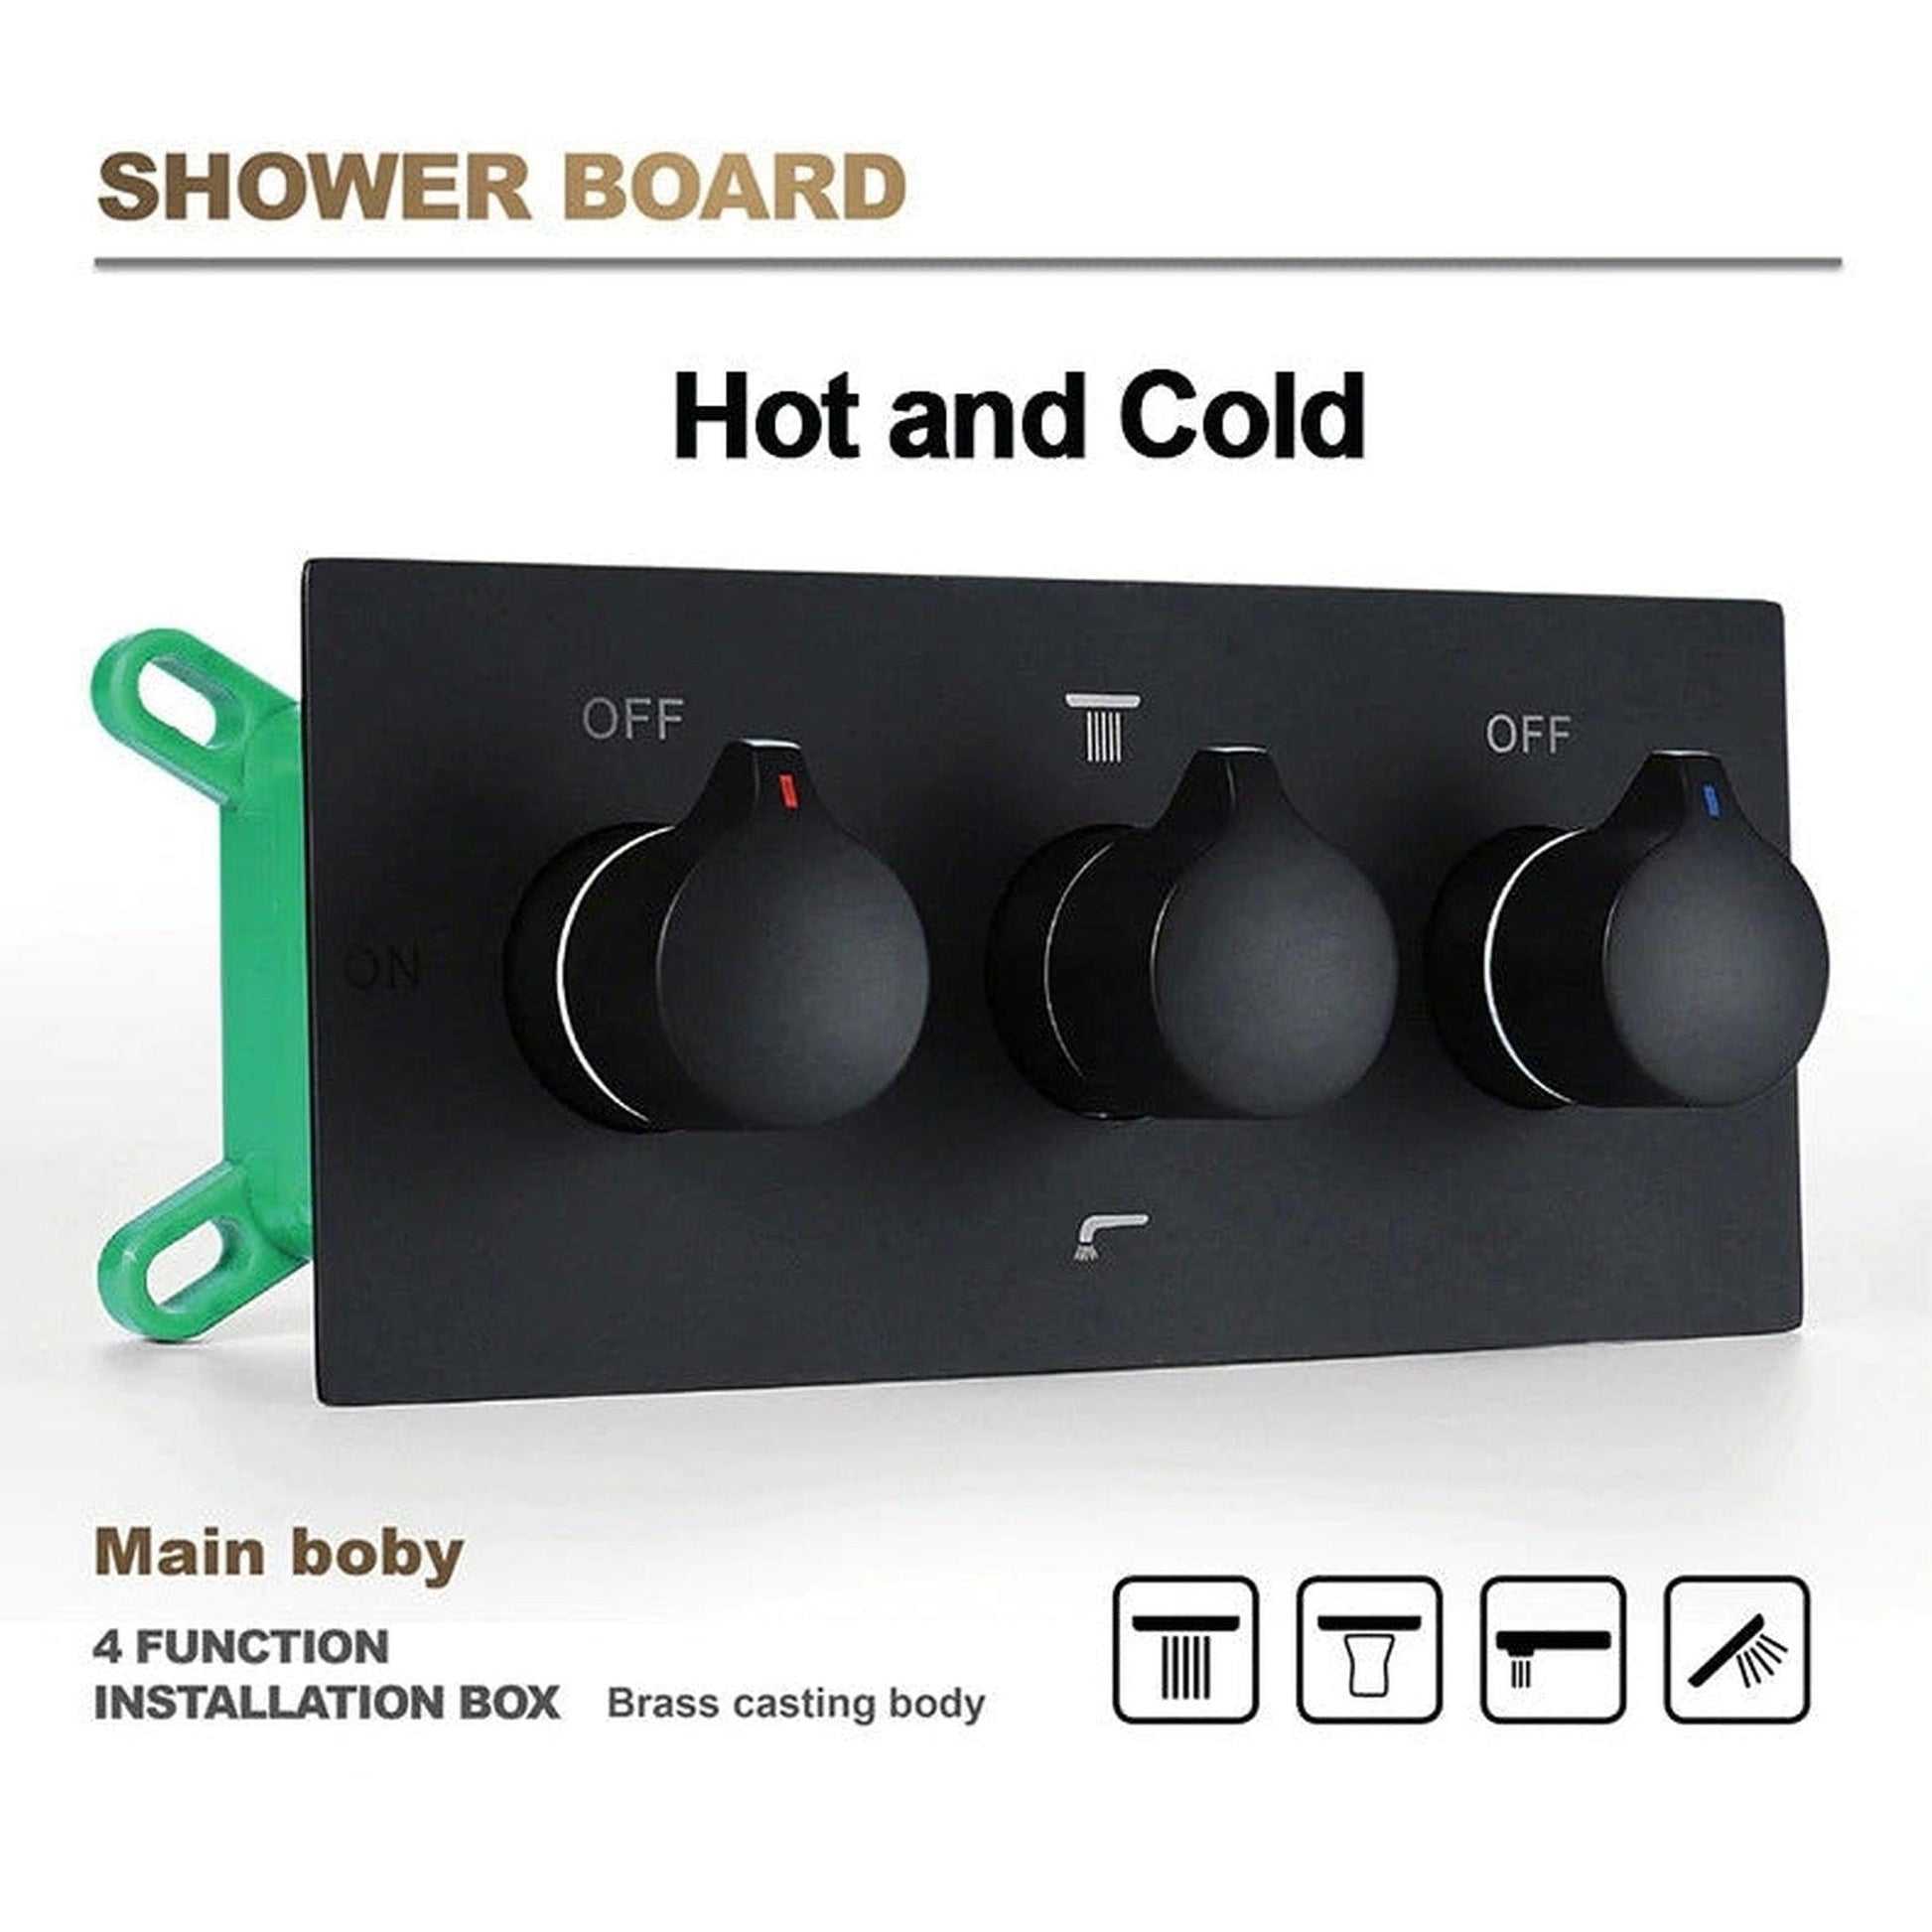 Fontana Carpi Matte Black Ceiling Mounted Phone Controlled Music Smart LED Rainfall Waterfall Shower System With Massage Jets and Hand Shower